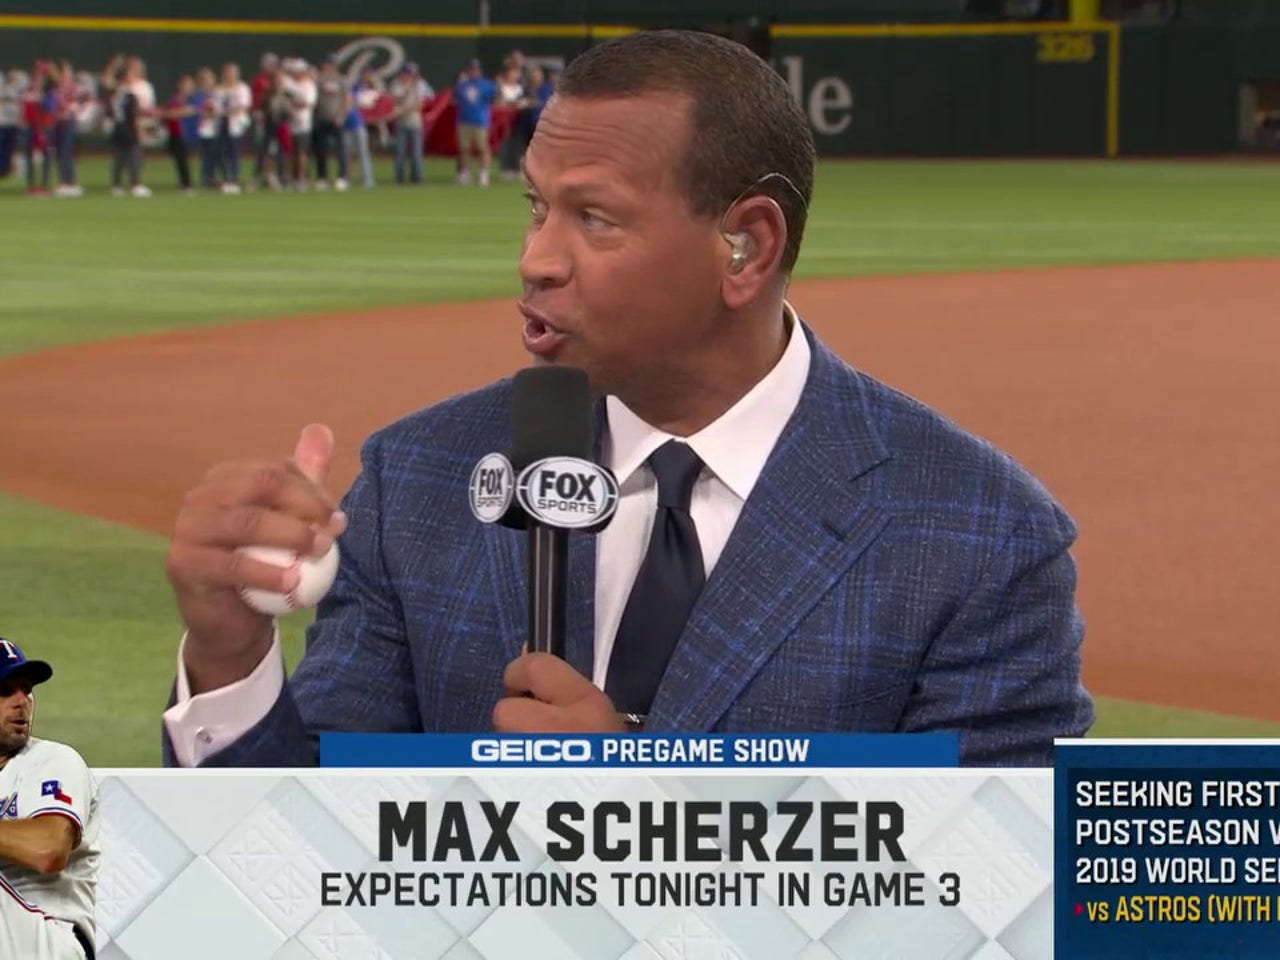 Max Scherzer reflects on his time with the Mets during his first